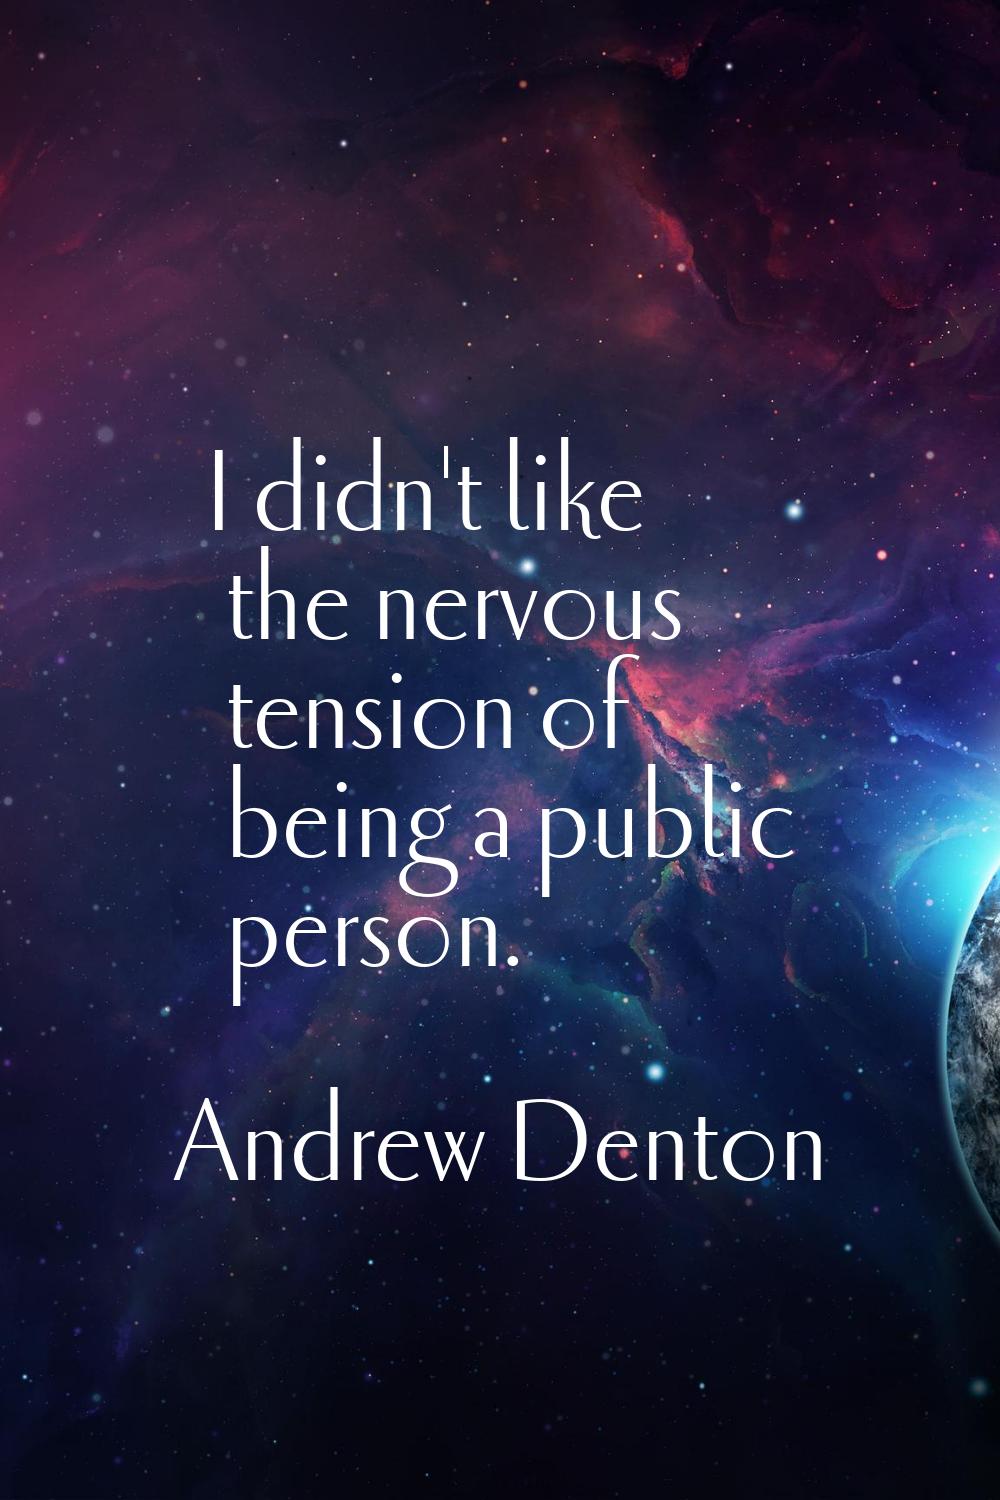 I didn't like the nervous tension of being a public person.